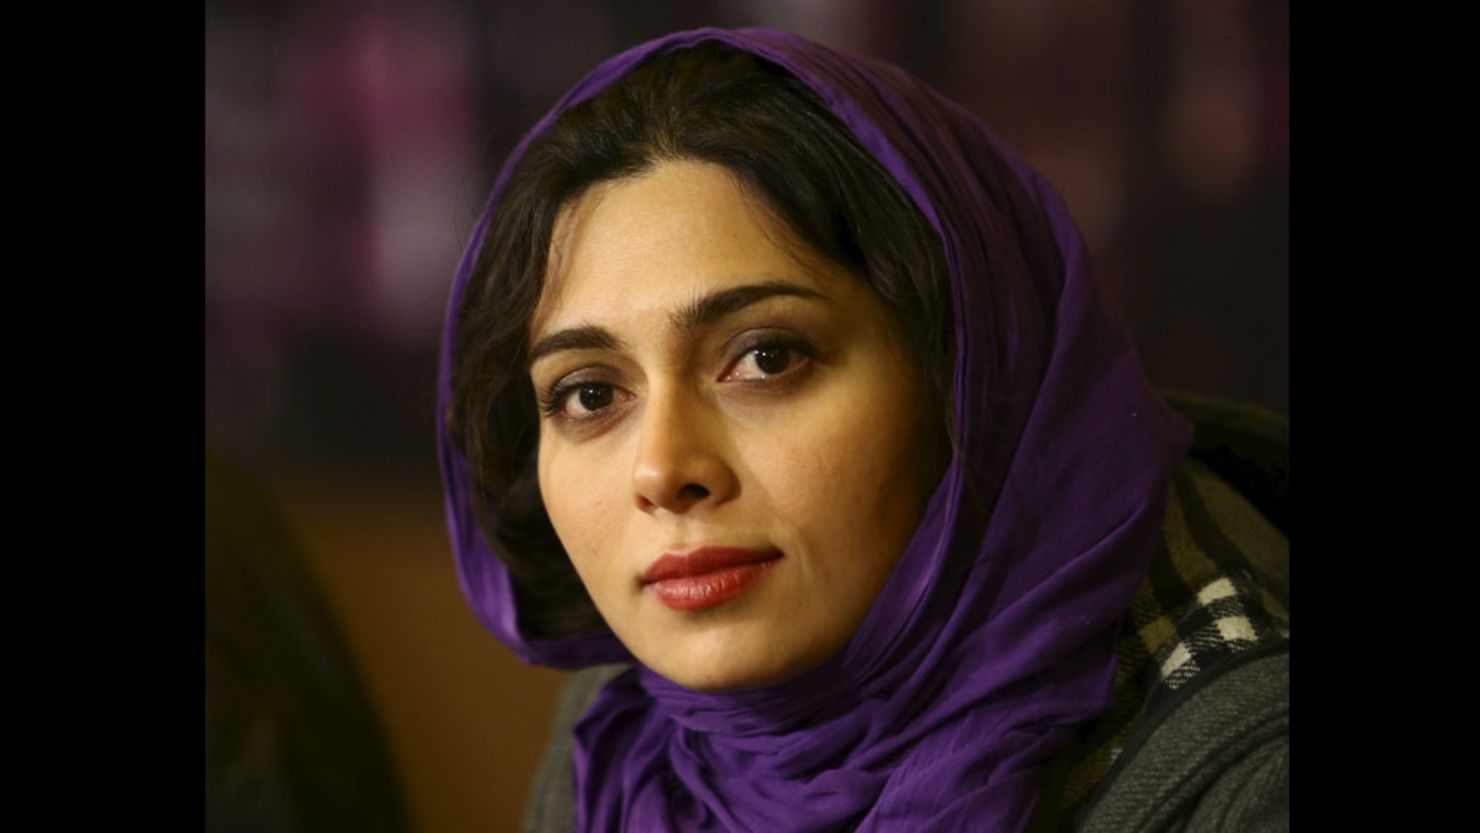 Actress and activist Pegah Ahangarani has been sentenced to 18 months in prison in Iran for her political activities.